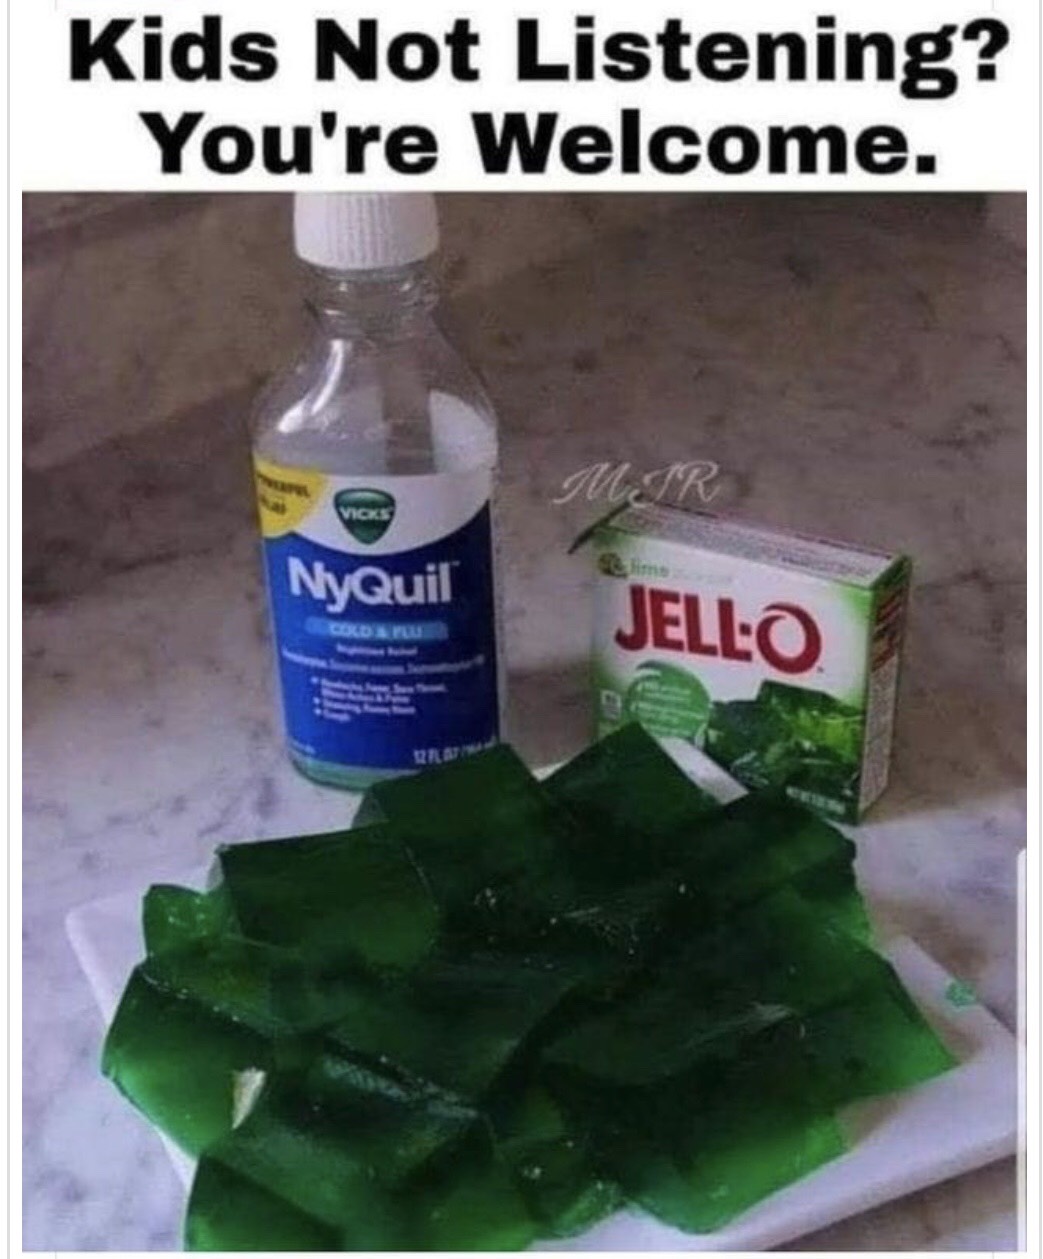 kids scooty - Kids Not Listening? You're Welcome. Vicks NyQuil Jello